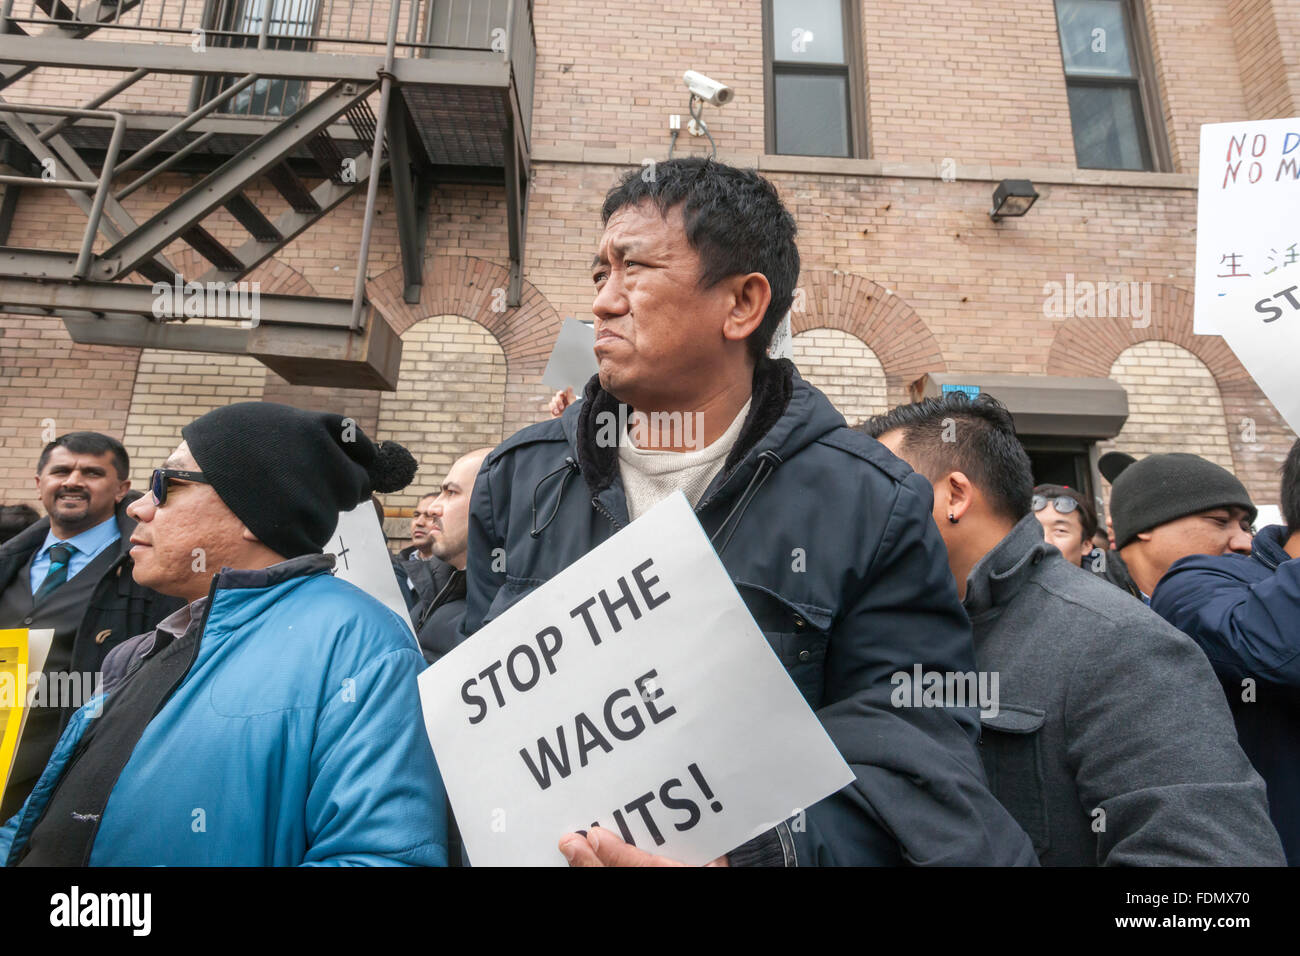 New York, USA. 1st February, 2016. Several hundred Uber drivers and their supporters strike in front of Uber's Queens offices in New York on Monday, February 1, 2016. The drivers are upset over Uber's recent 15% cut in fares meaning less money for the drivers. Uber claims that the cut will increase volume and the drivers will have less down-time. Credit:  Richard Levine/Alamy Live News Stock Photo